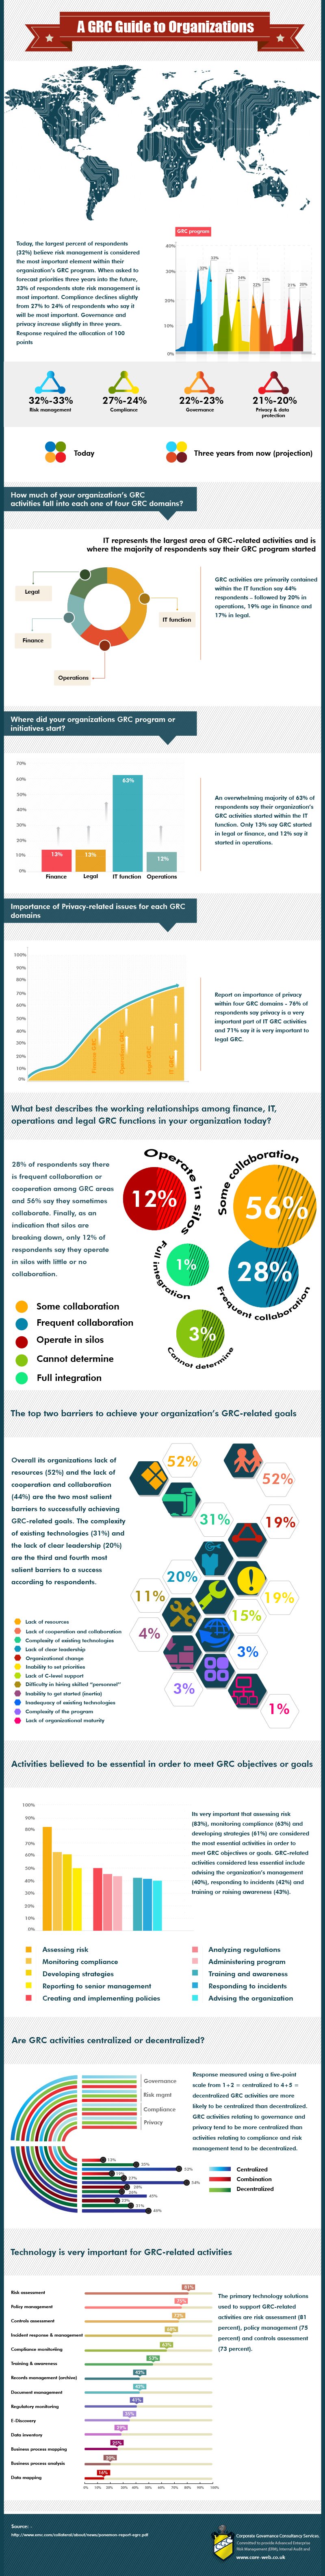 Infographics – A GRC Guide (Governance, Risk and Compliance) to Organizations